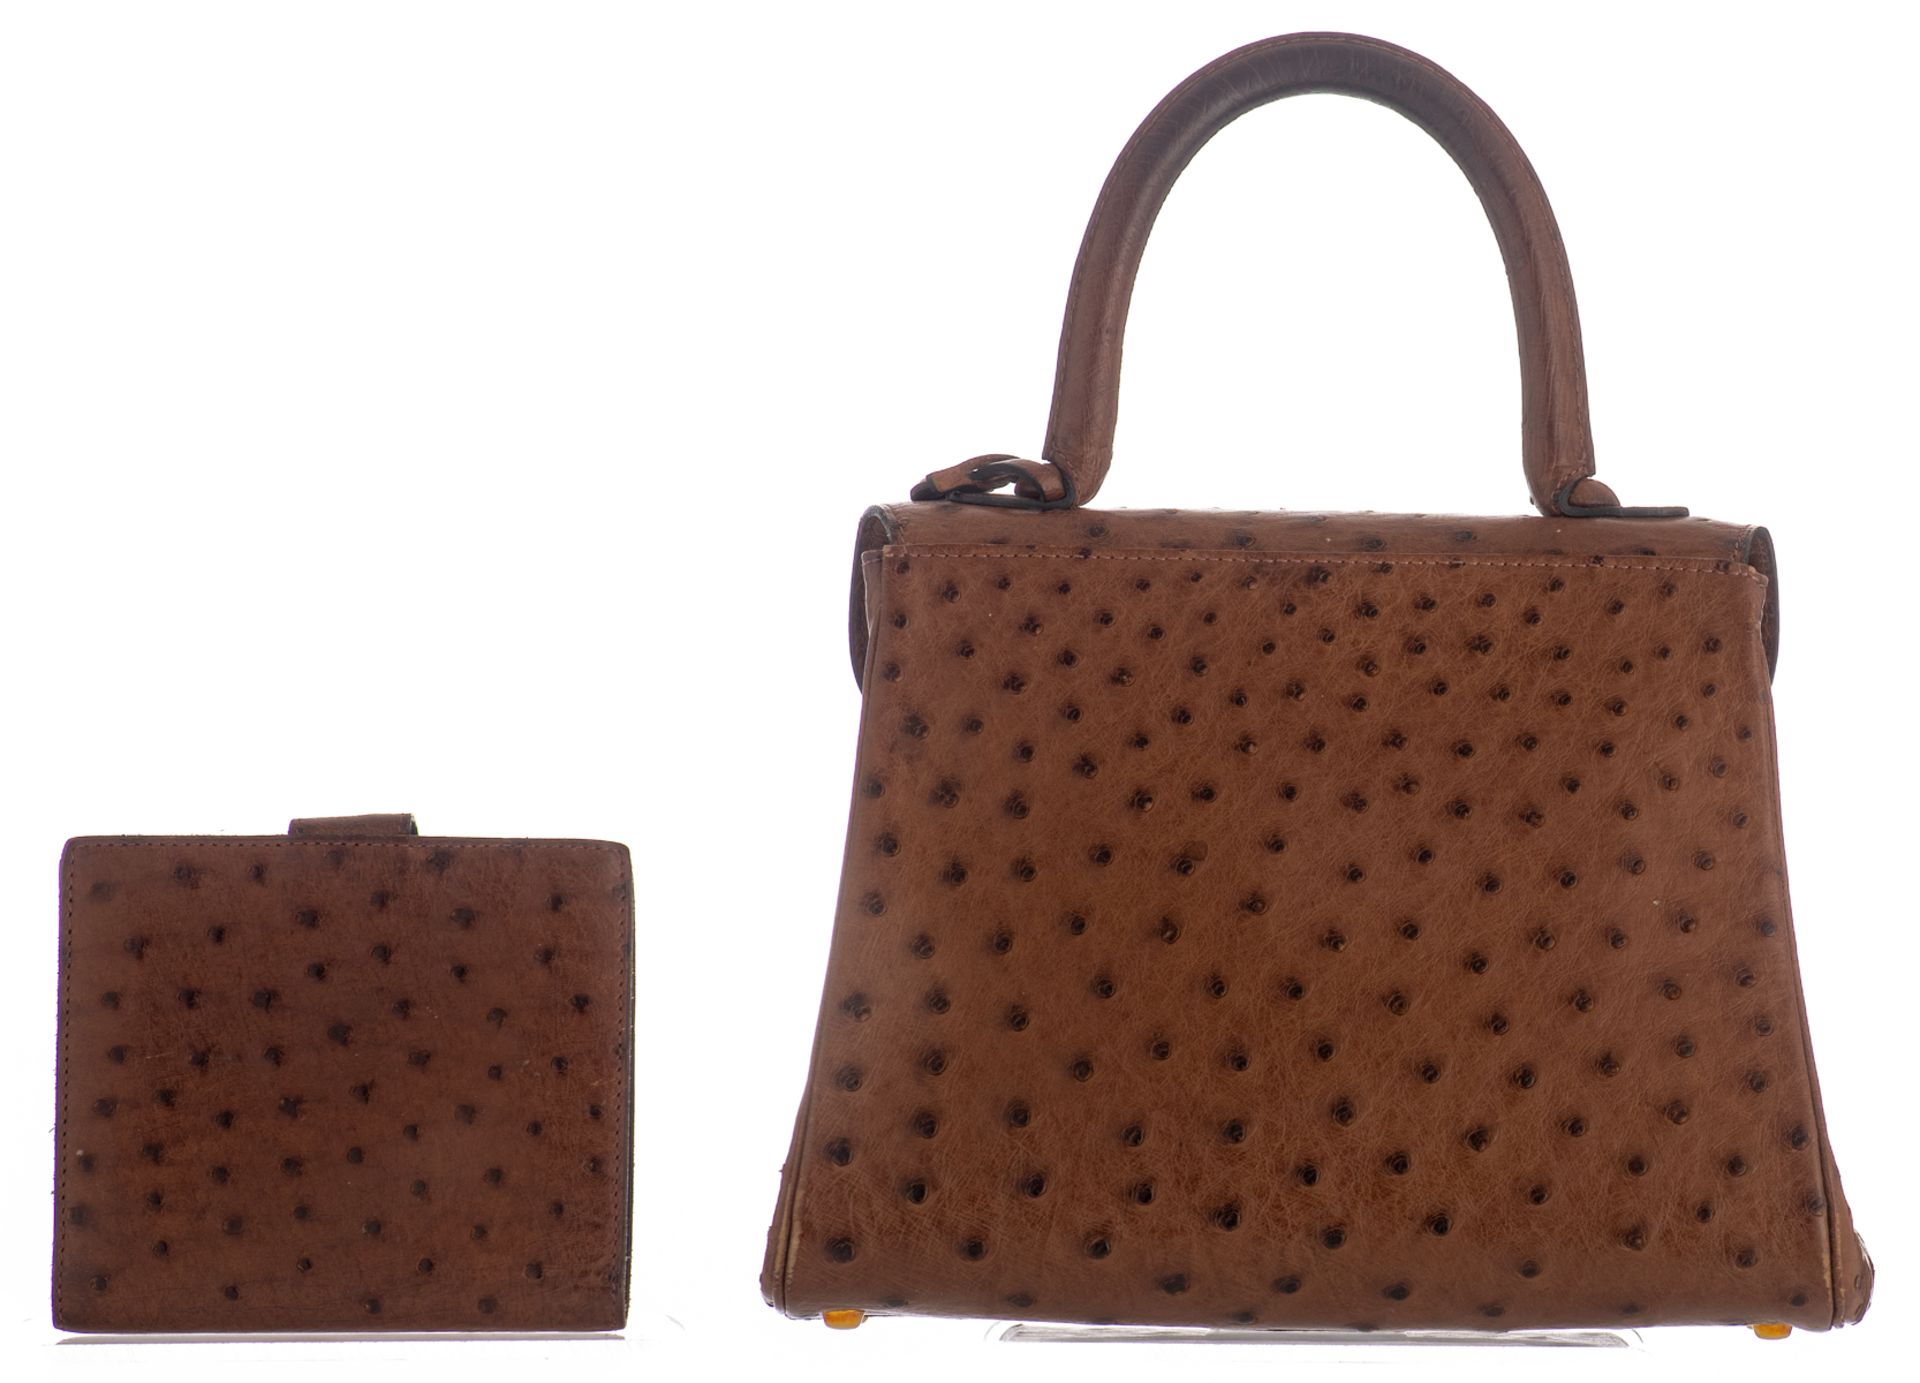 A Delvaux Brillant PM Ostrich leather handbag with matching wallet, H 24,5 x 18 cm - Image 3 of 9